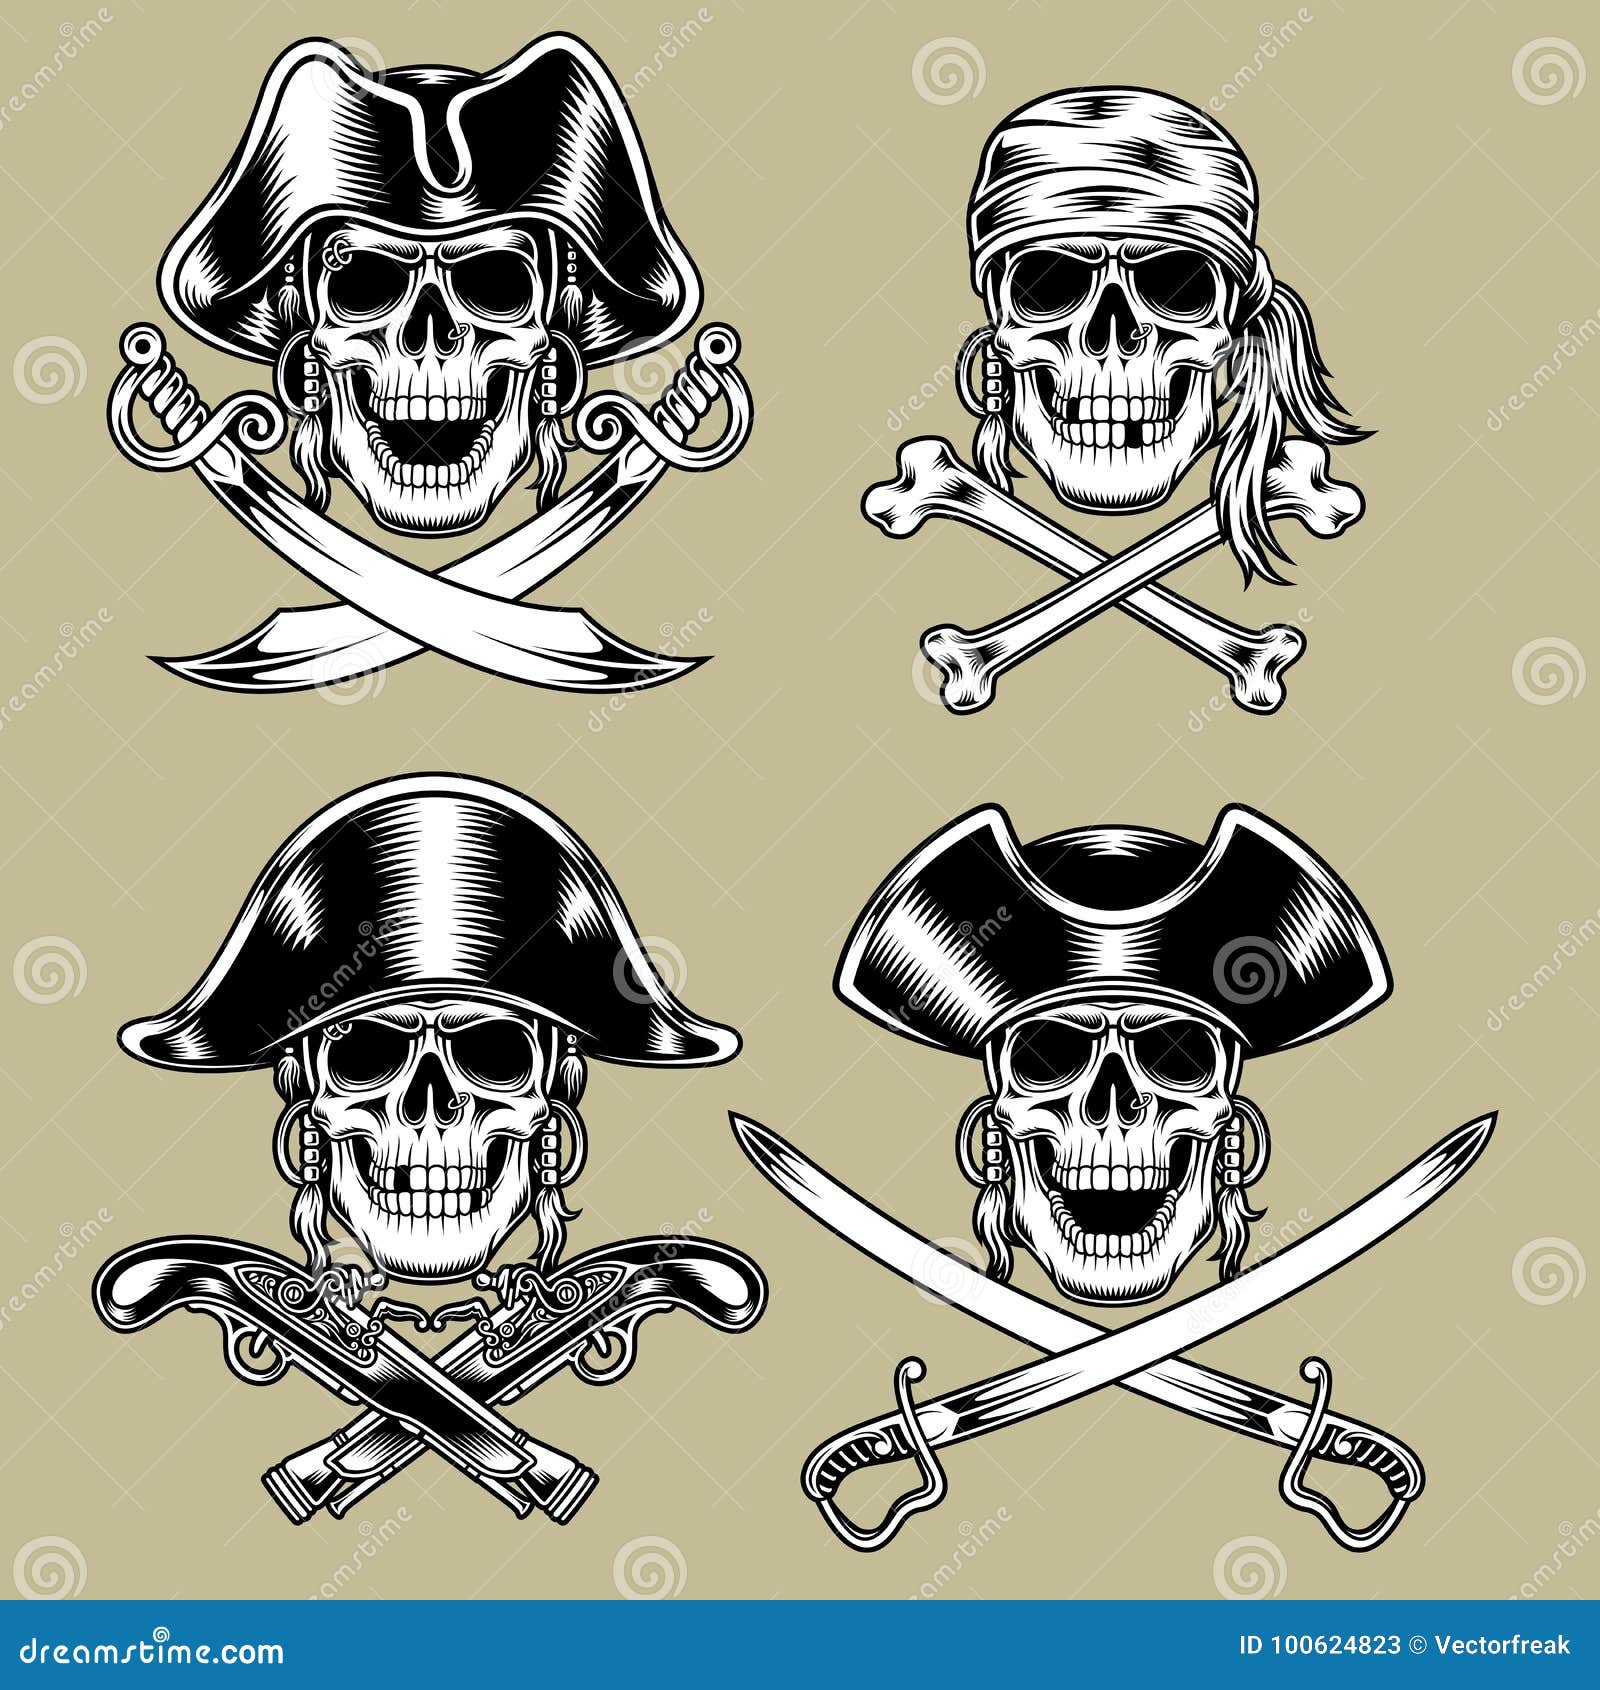 43255 Pirate Tattoo Images Stock Photos  Vectors  Shutterstock